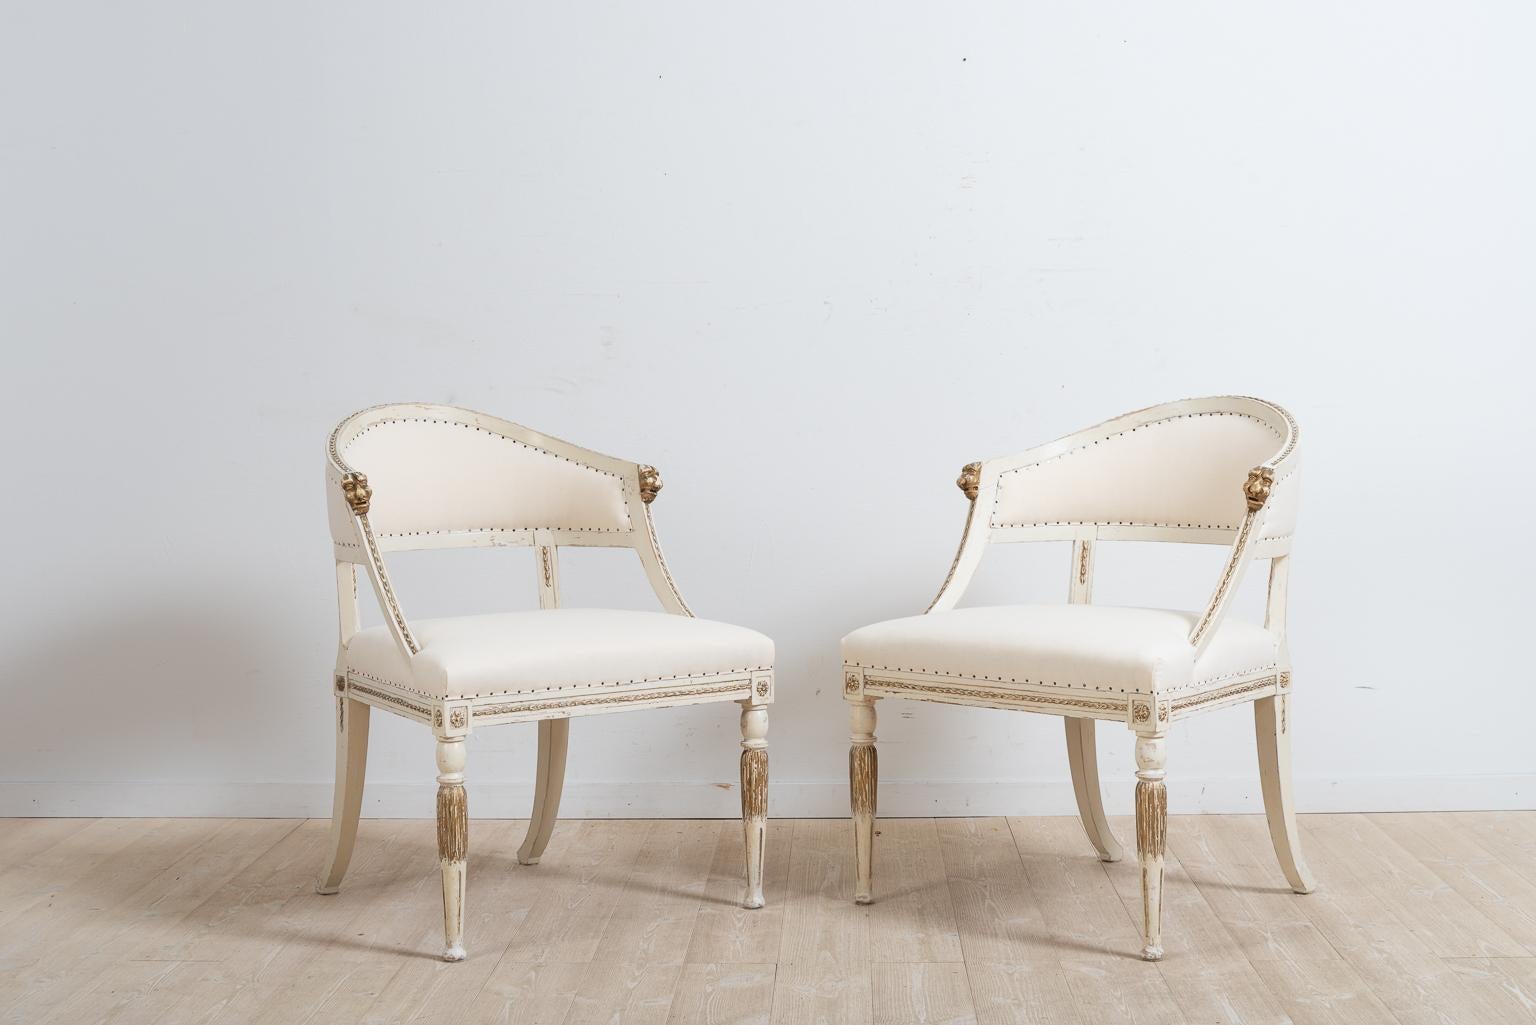 A pair of barrel back armchairs from northern Sweden. The chairs were manufactured in Gustavian style, circa 1880. Carved wooden decorations such as the gold painted lion heads at the end of each armrest. The chairs have their original paint which